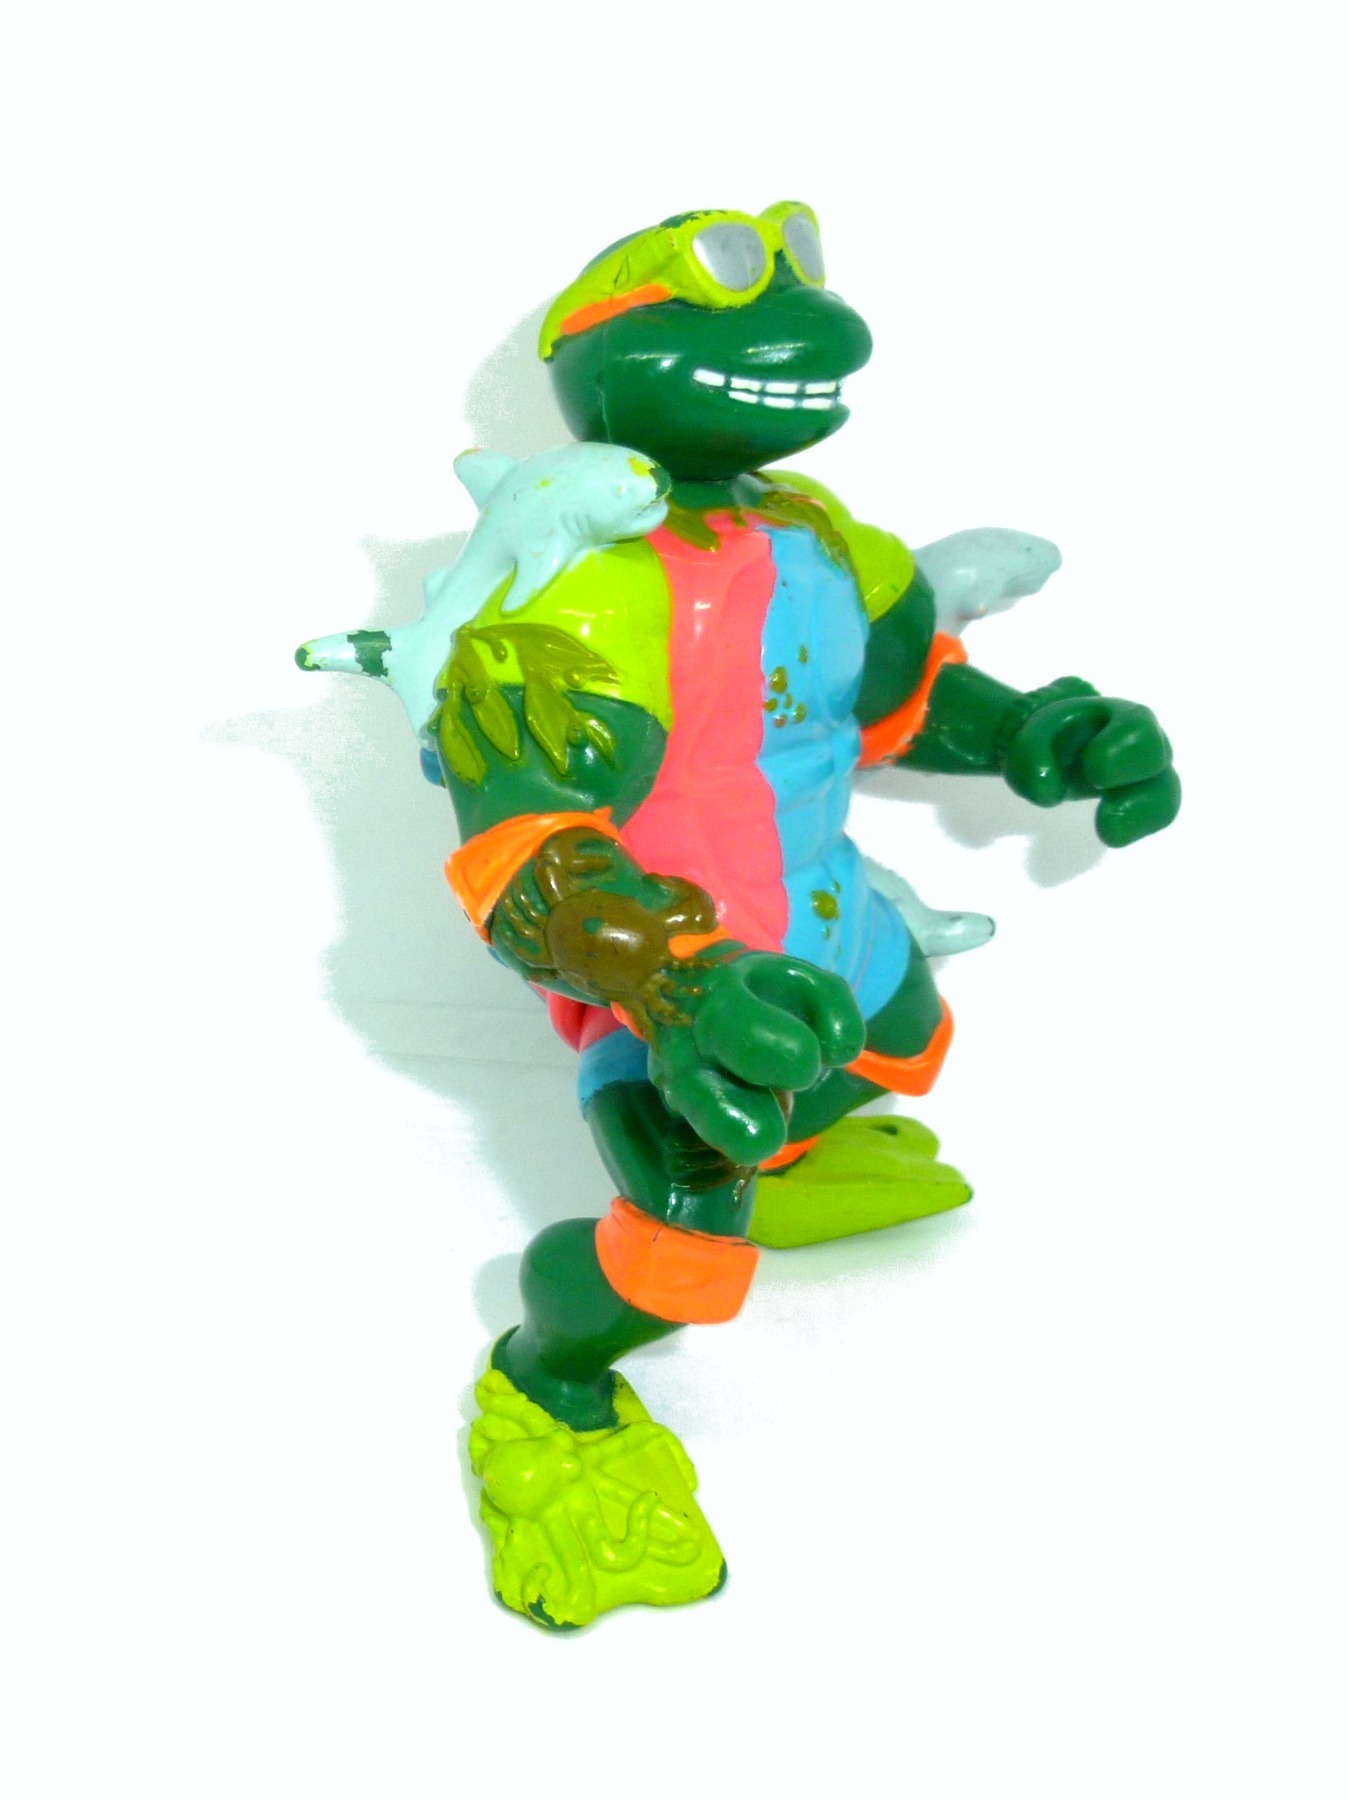 Mike, the Sewer Surfer - Michelangelo 1990 Mirage Studios / Playmates Toys 2